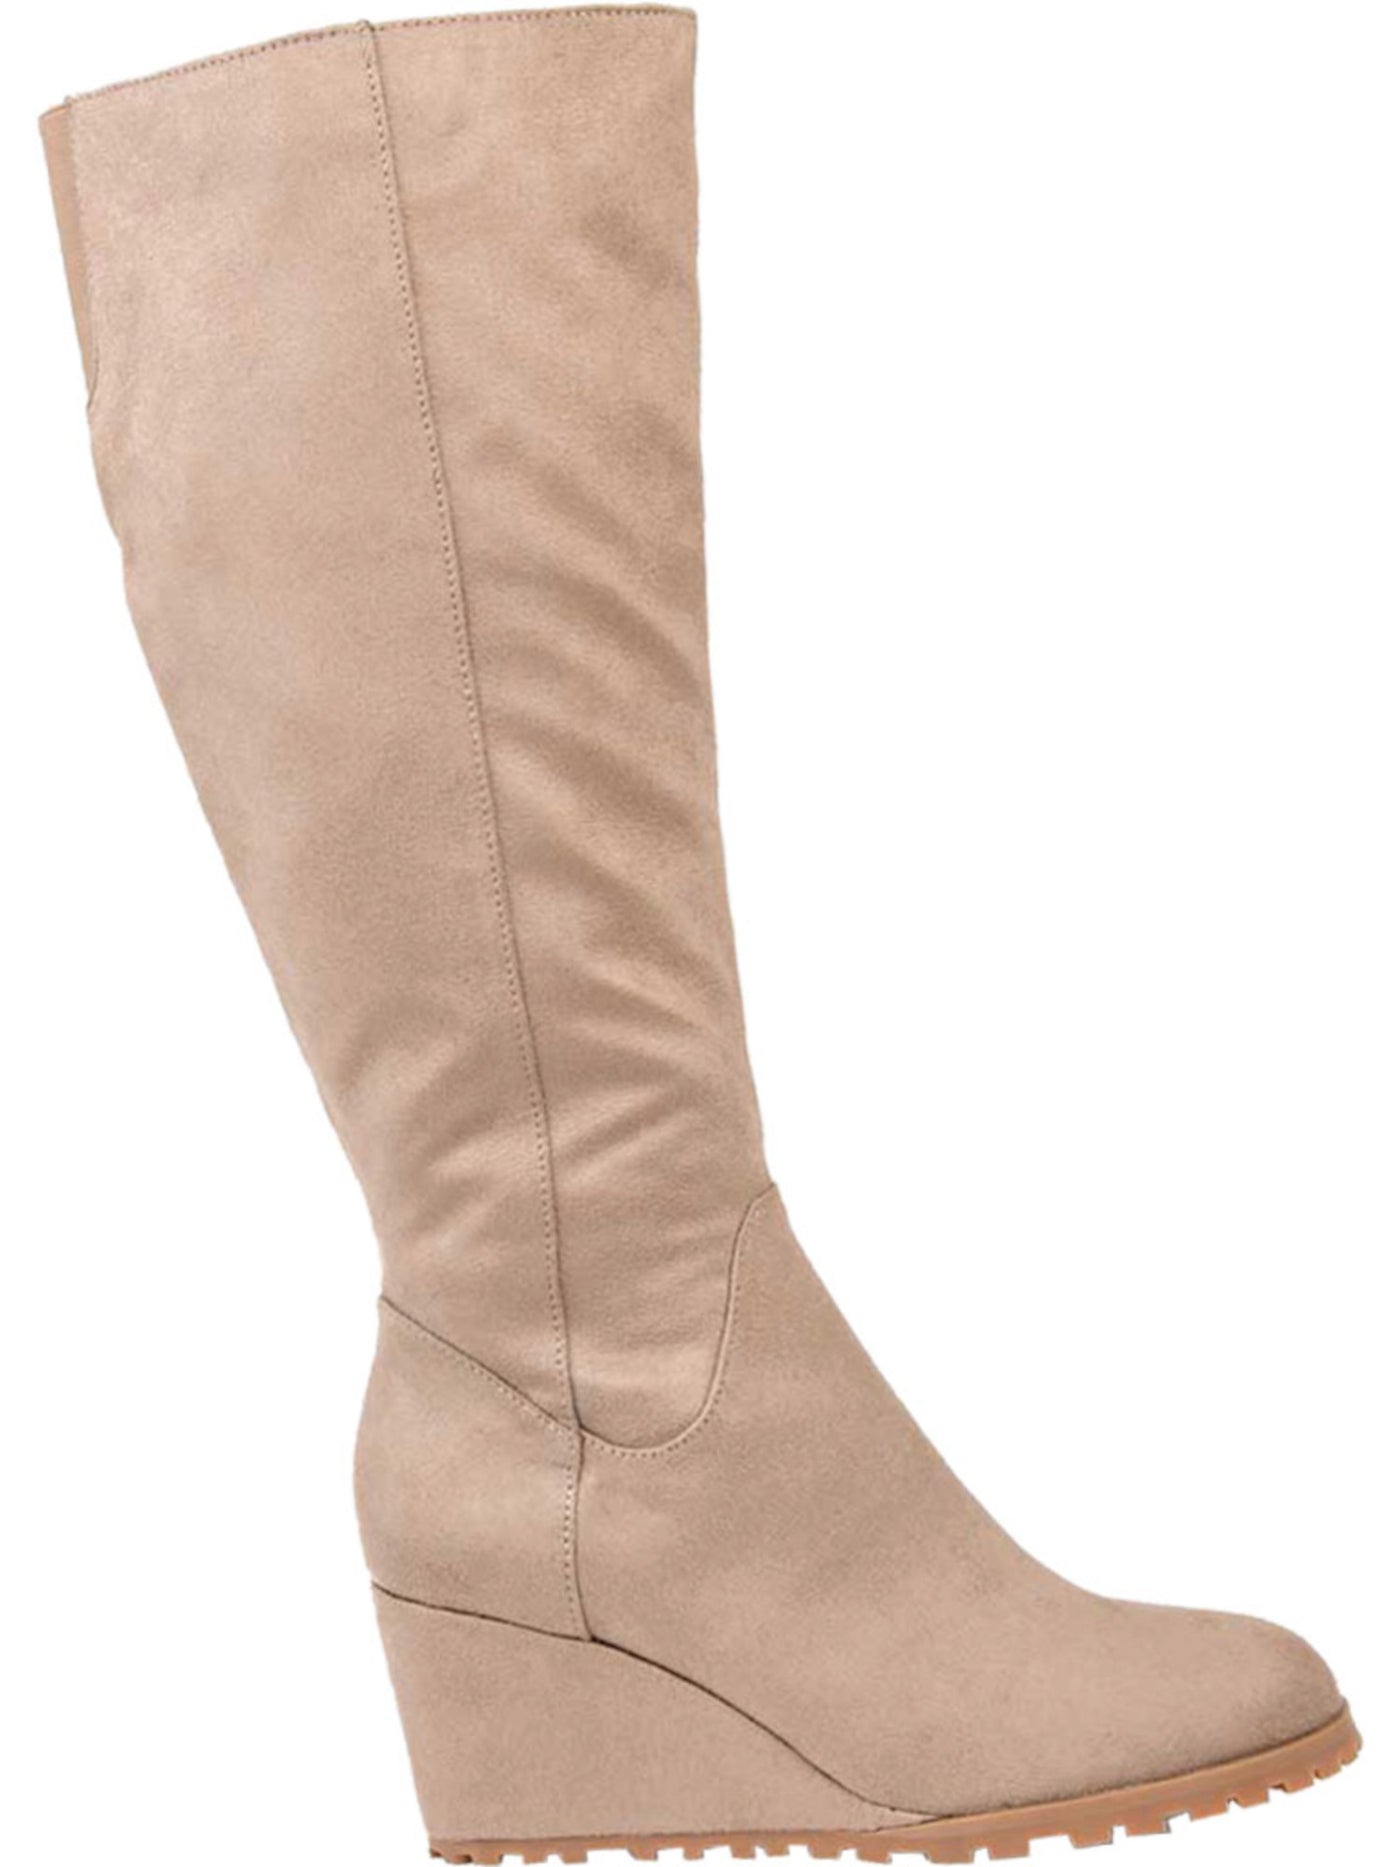 JOURNEE COLLECTION Womens Taupe Beige Padded Parker Almond Toe Wedge Zip-Up Heeled Boots 10 XWC